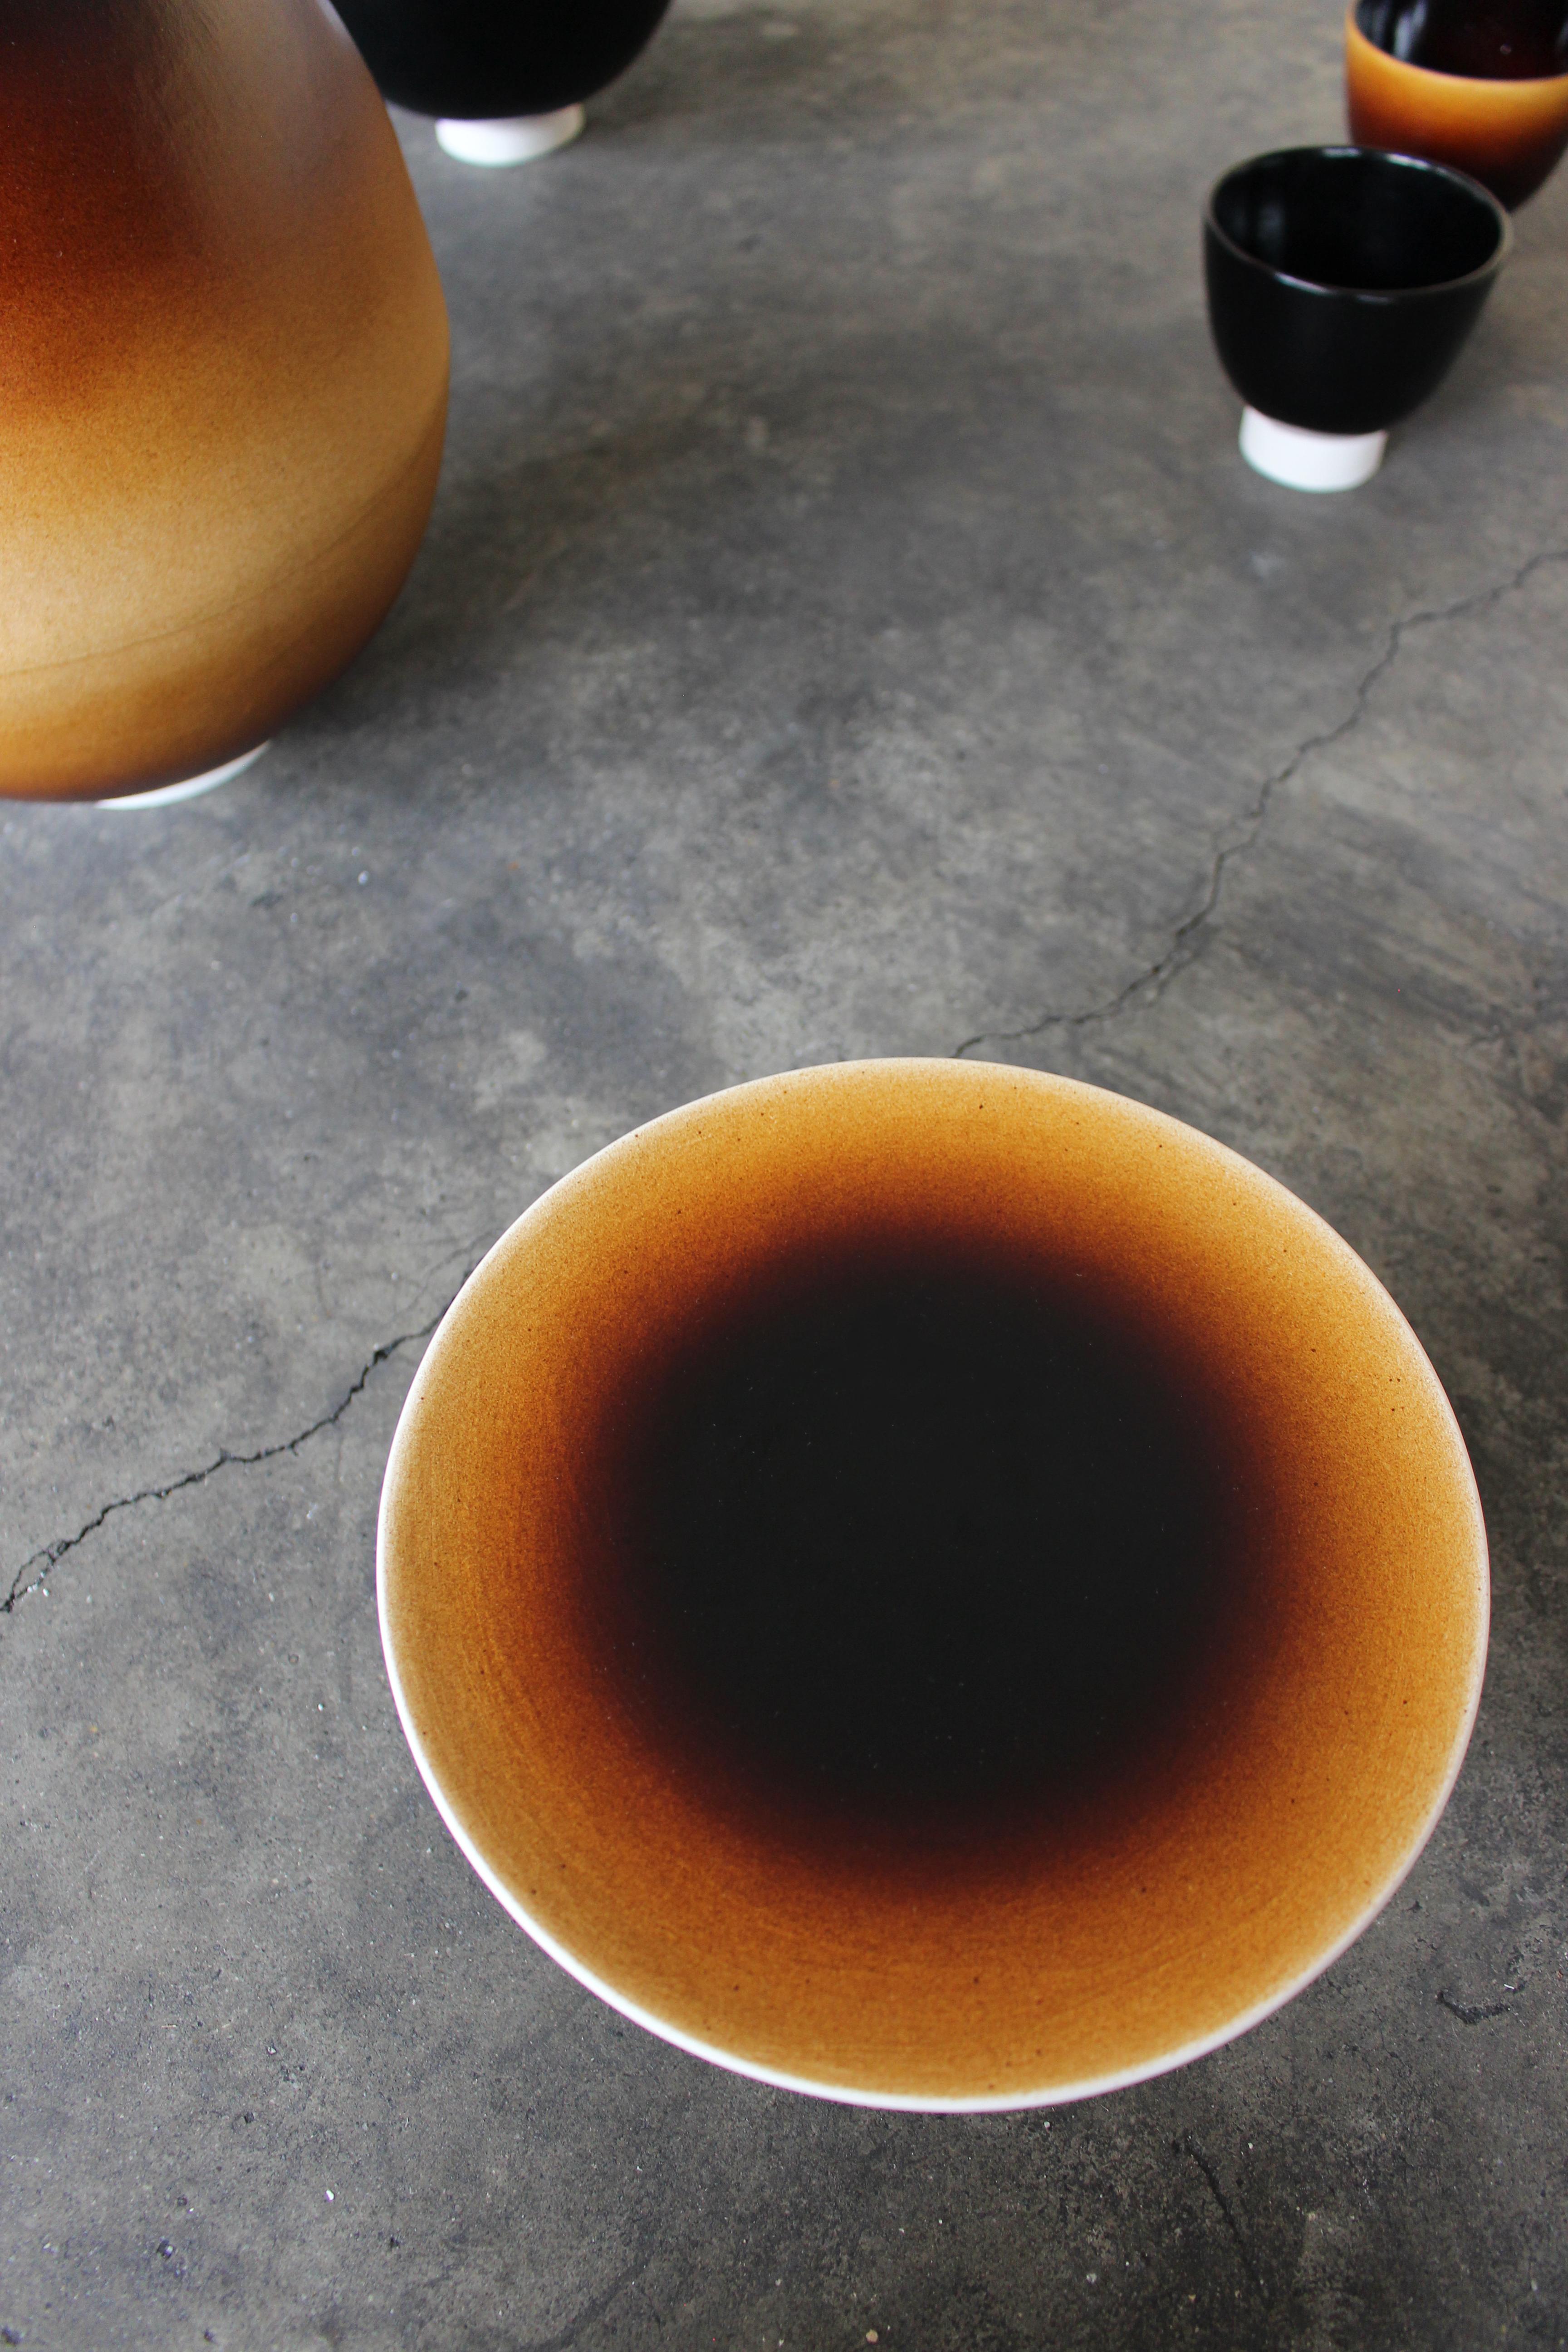 Ott Another Paradigmatic Handmade Ceramic Cup by Studio Yoon Seok-Hyeon For Sale 2